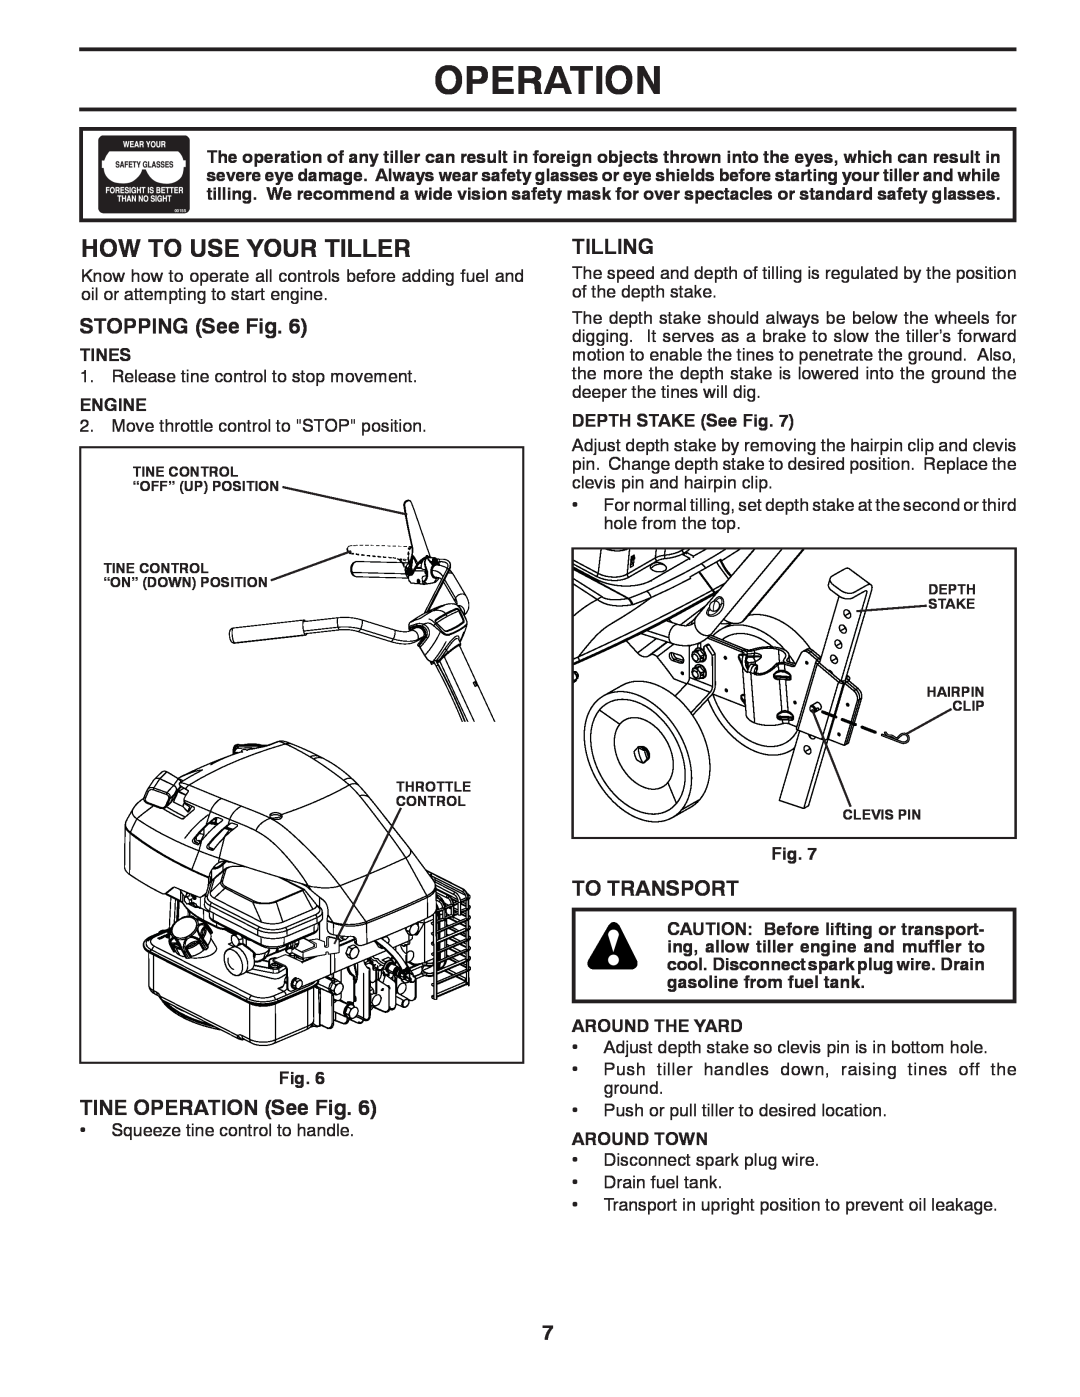 Poulan 96082001500 How To Use Your Tiller, STOPPING See Fig, TINE OPERATION See Fig, Tilling, To Transport, Operation 